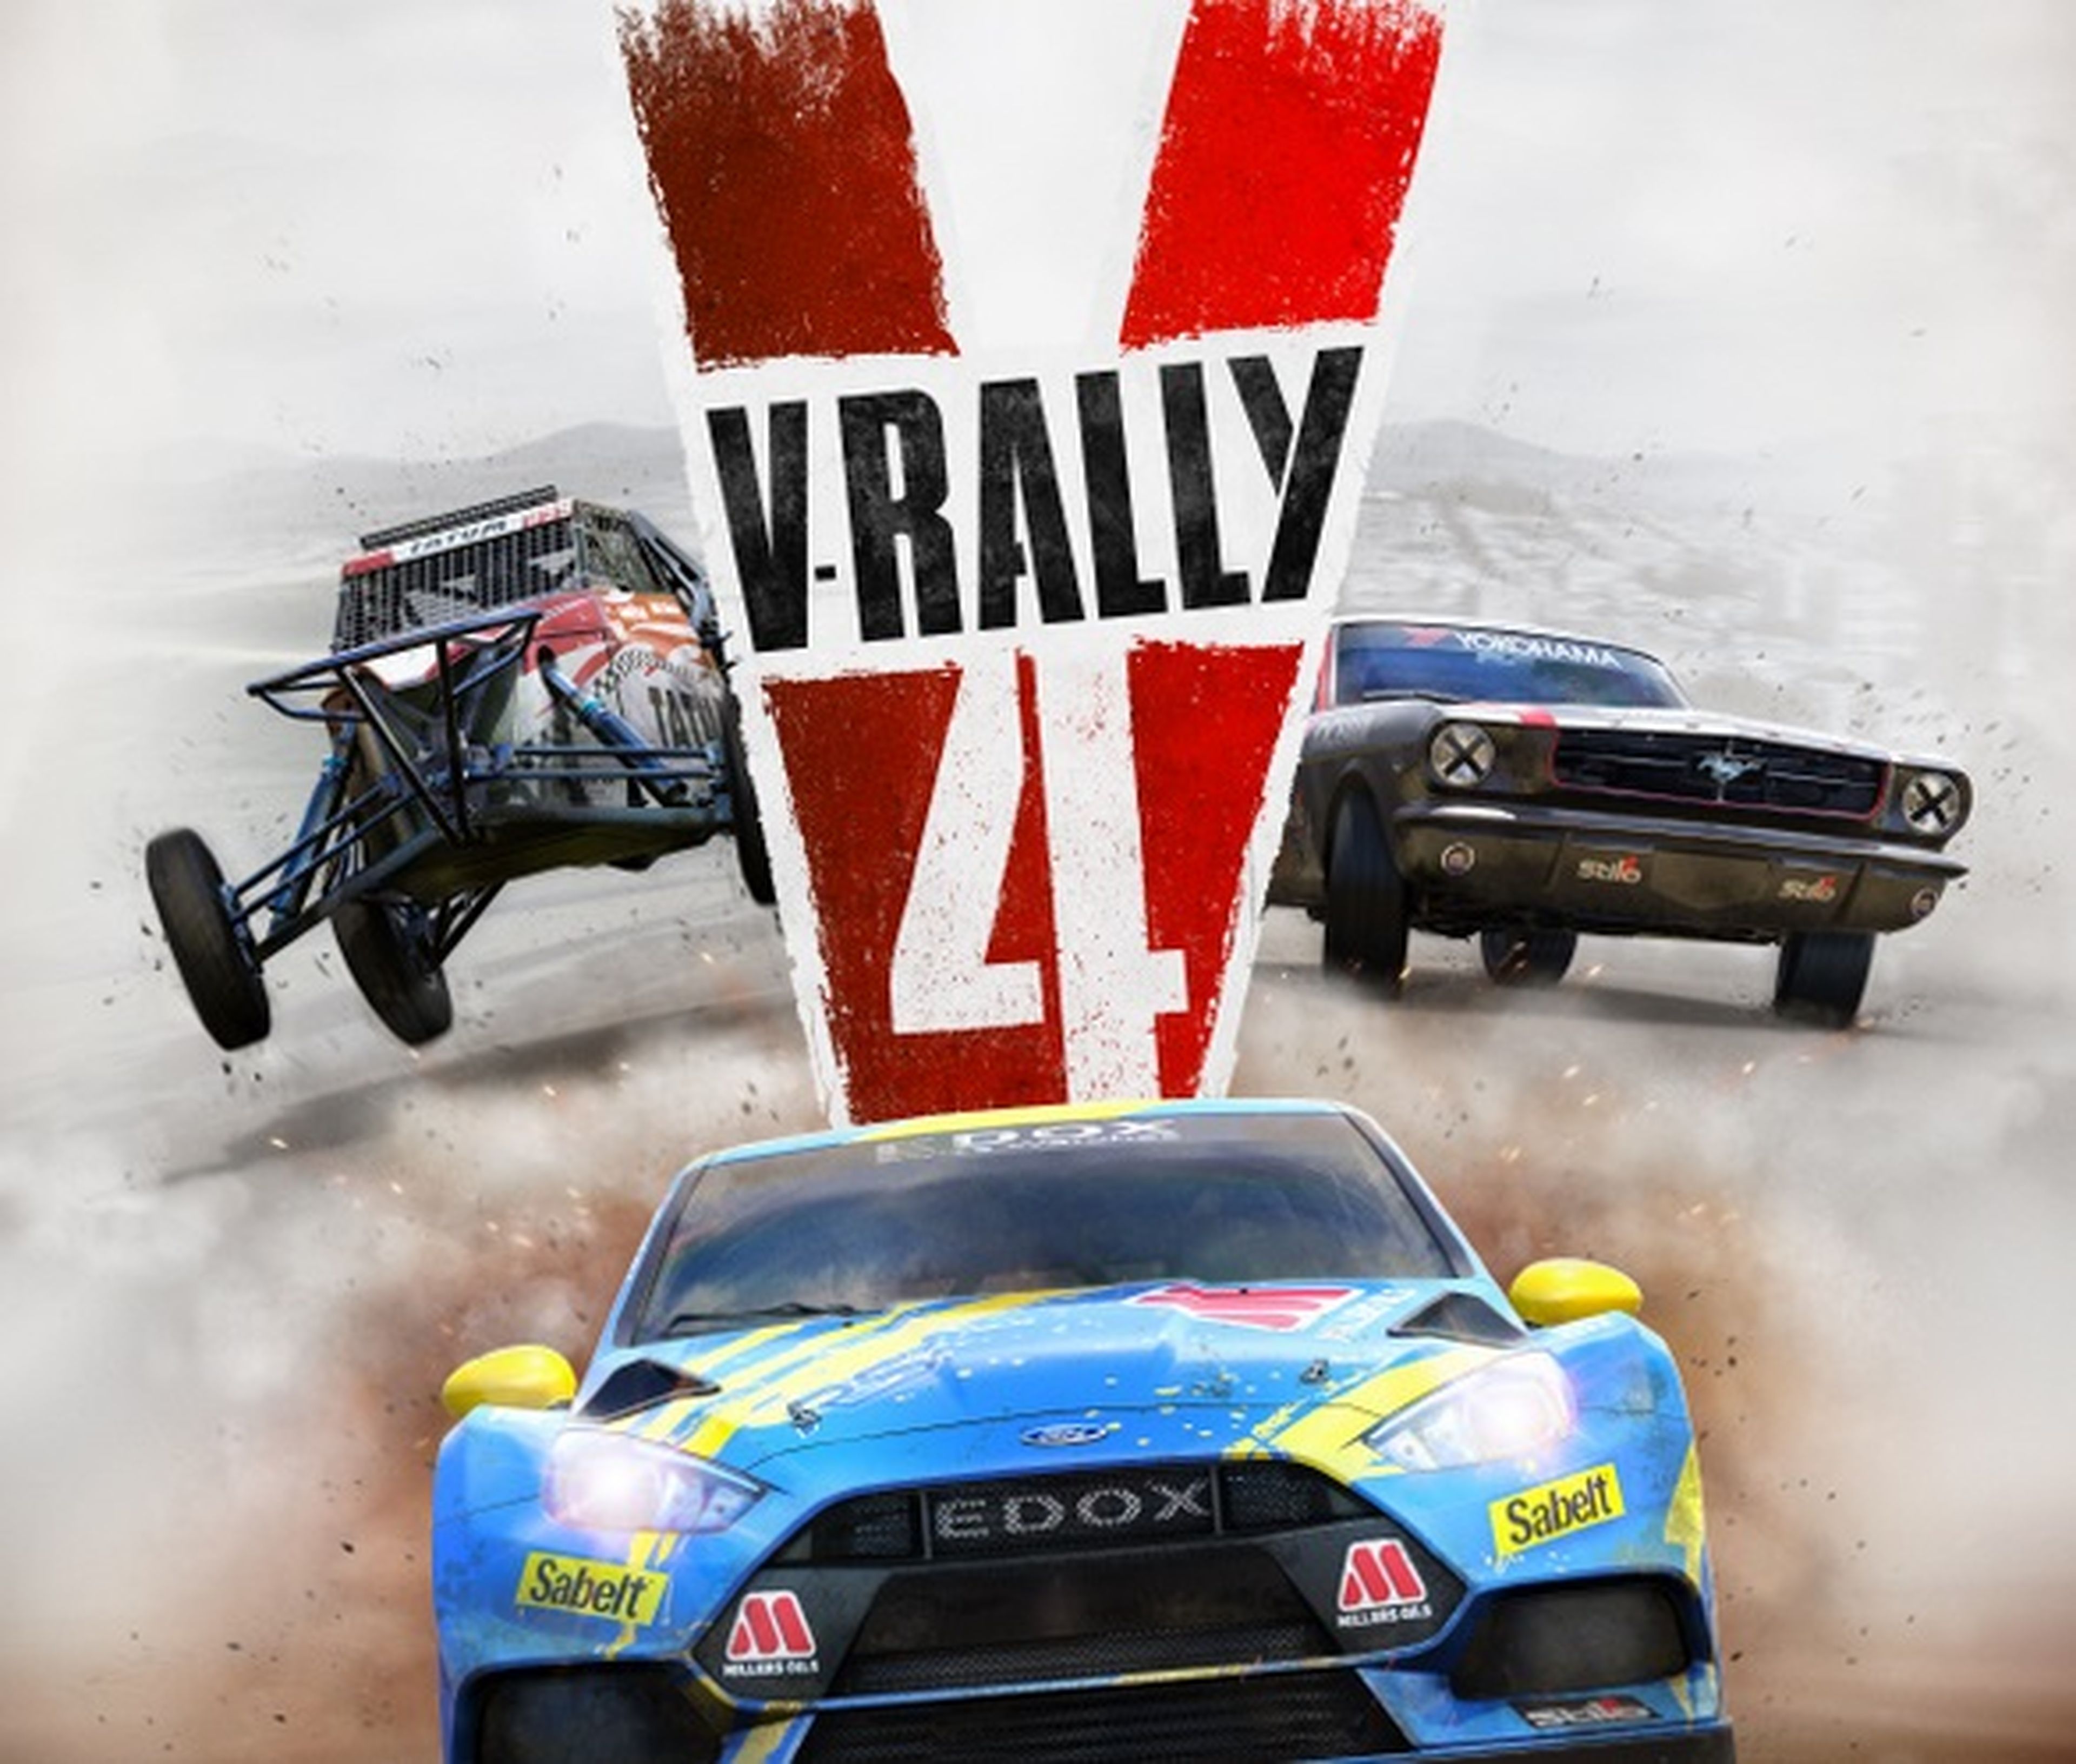 VRally 4